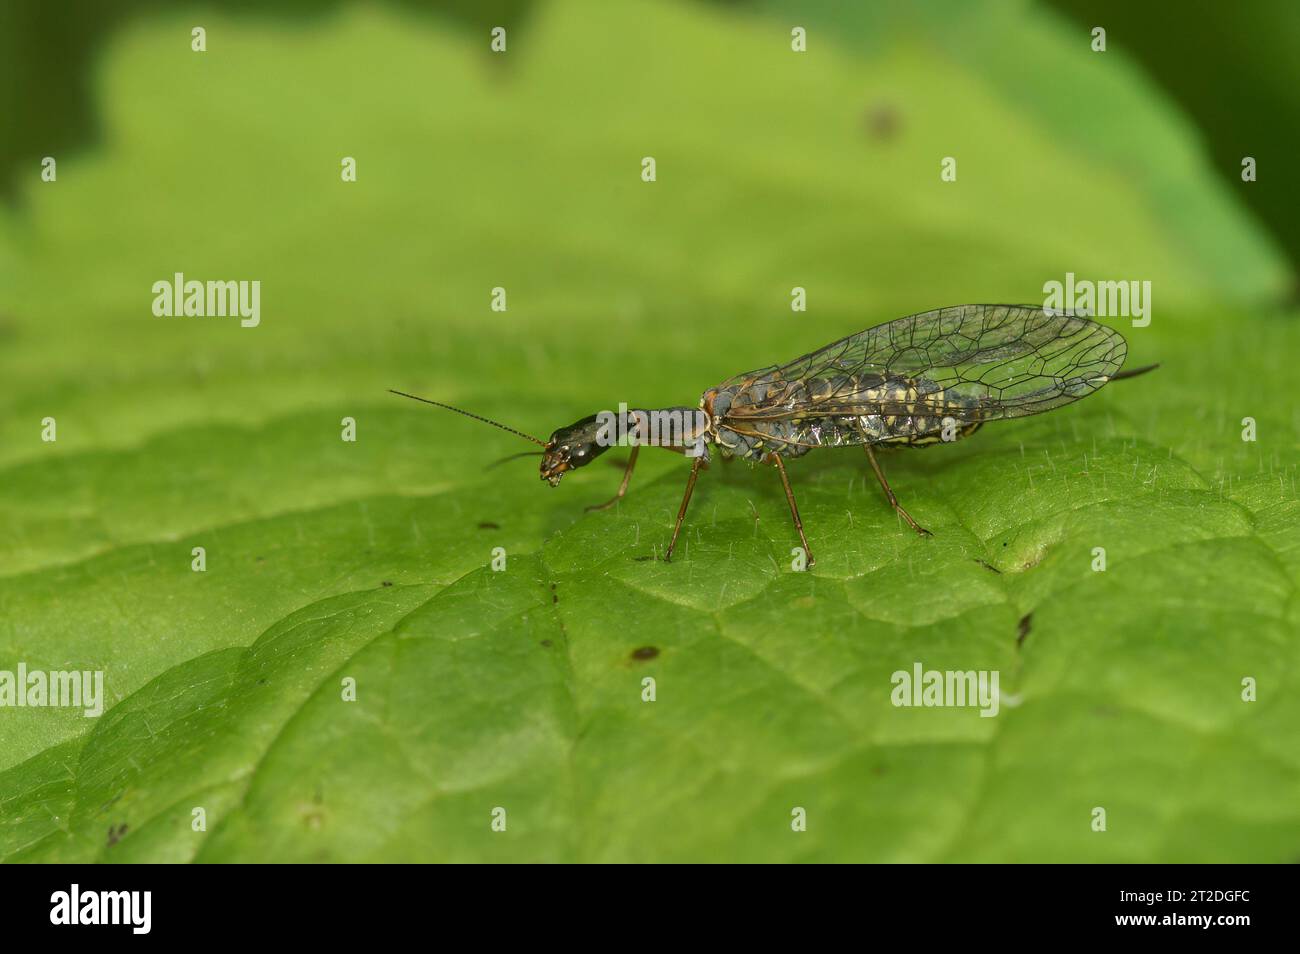 Closeup on a bizarre looking snake fly, Subilla confinis, sitting on a green leaf Stock Photo